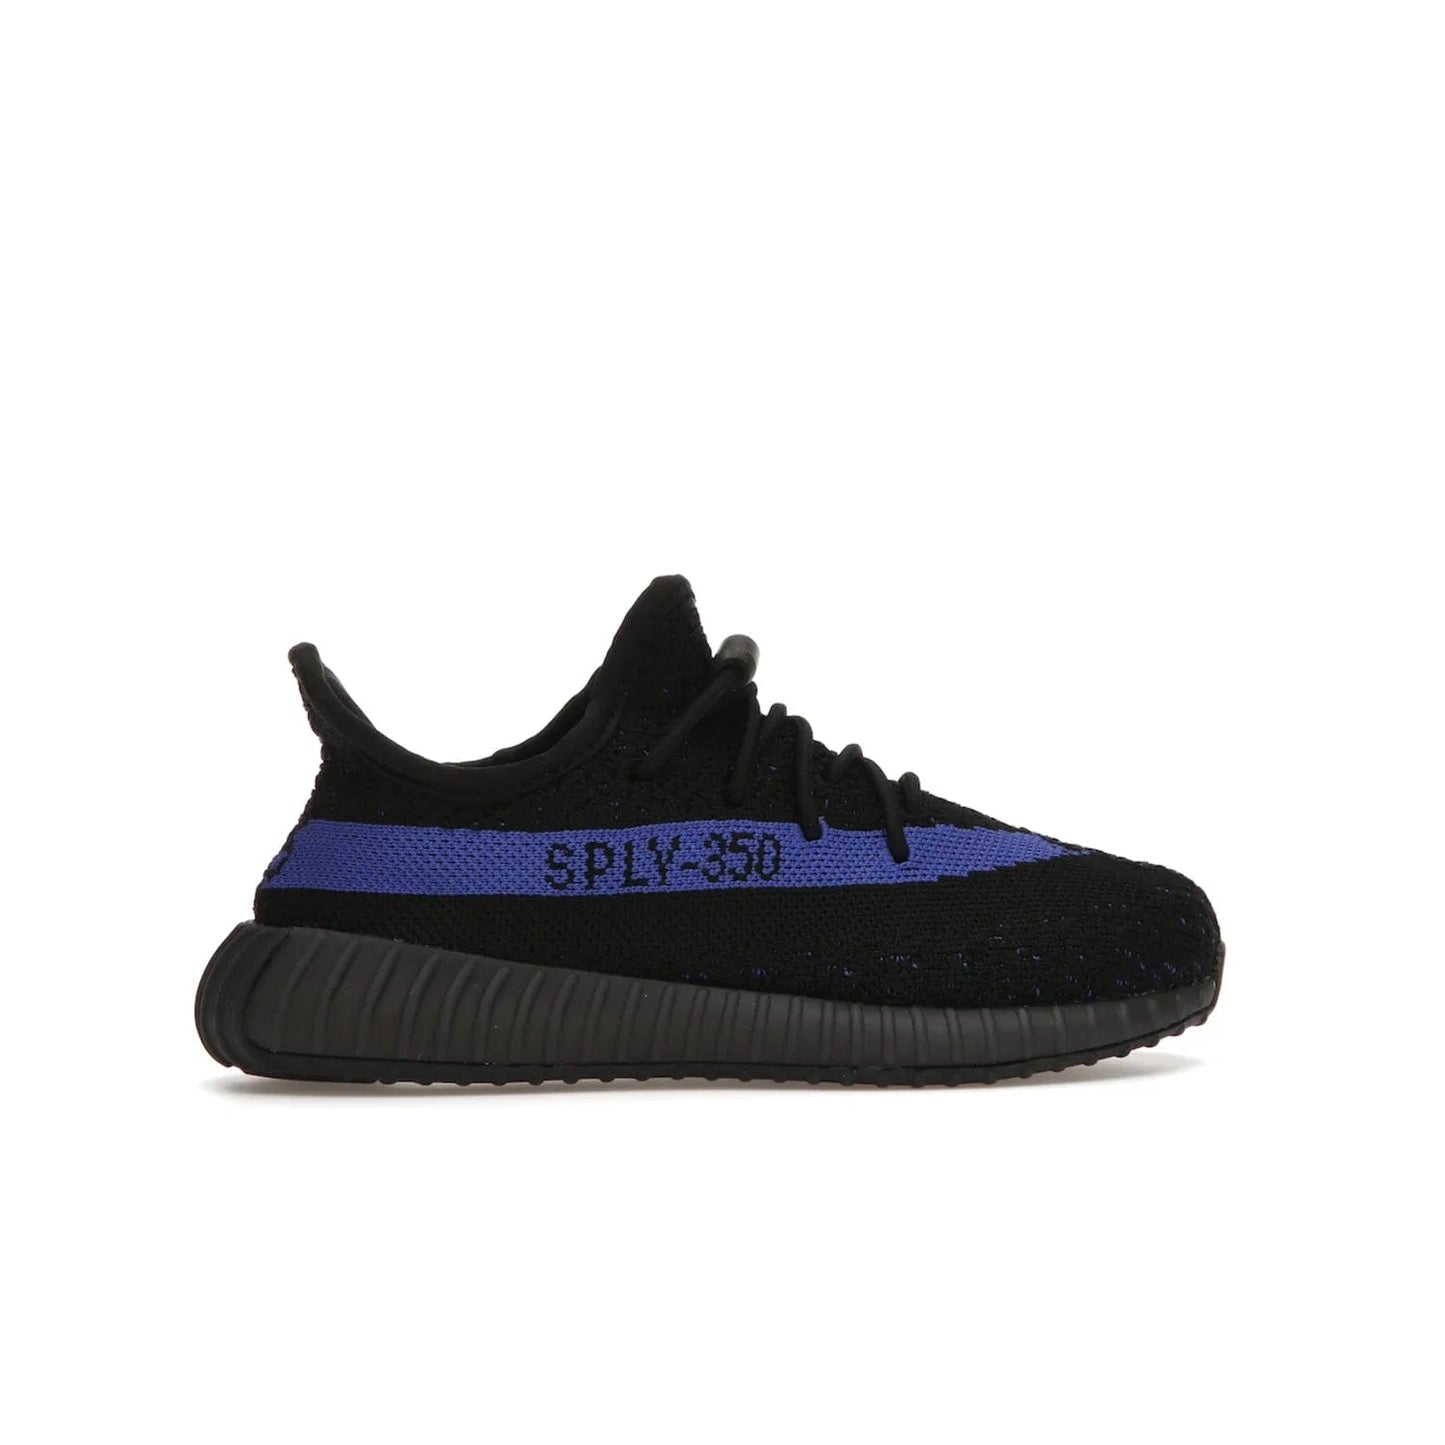 adidas Yeezy Boost 350 V2 Dazzling Blue (Kids) - Image 36 - Only at www.BallersClubKickz.com - Shop the adidas Yeezy Boost 350 V2 Dazzling Blue (Kids). Features a black Primeknit upper with a royal blue 'SPLY-350' streak and a full-length Boost midsole. Durable rubber outsole provides plenty of traction. Available for $160.